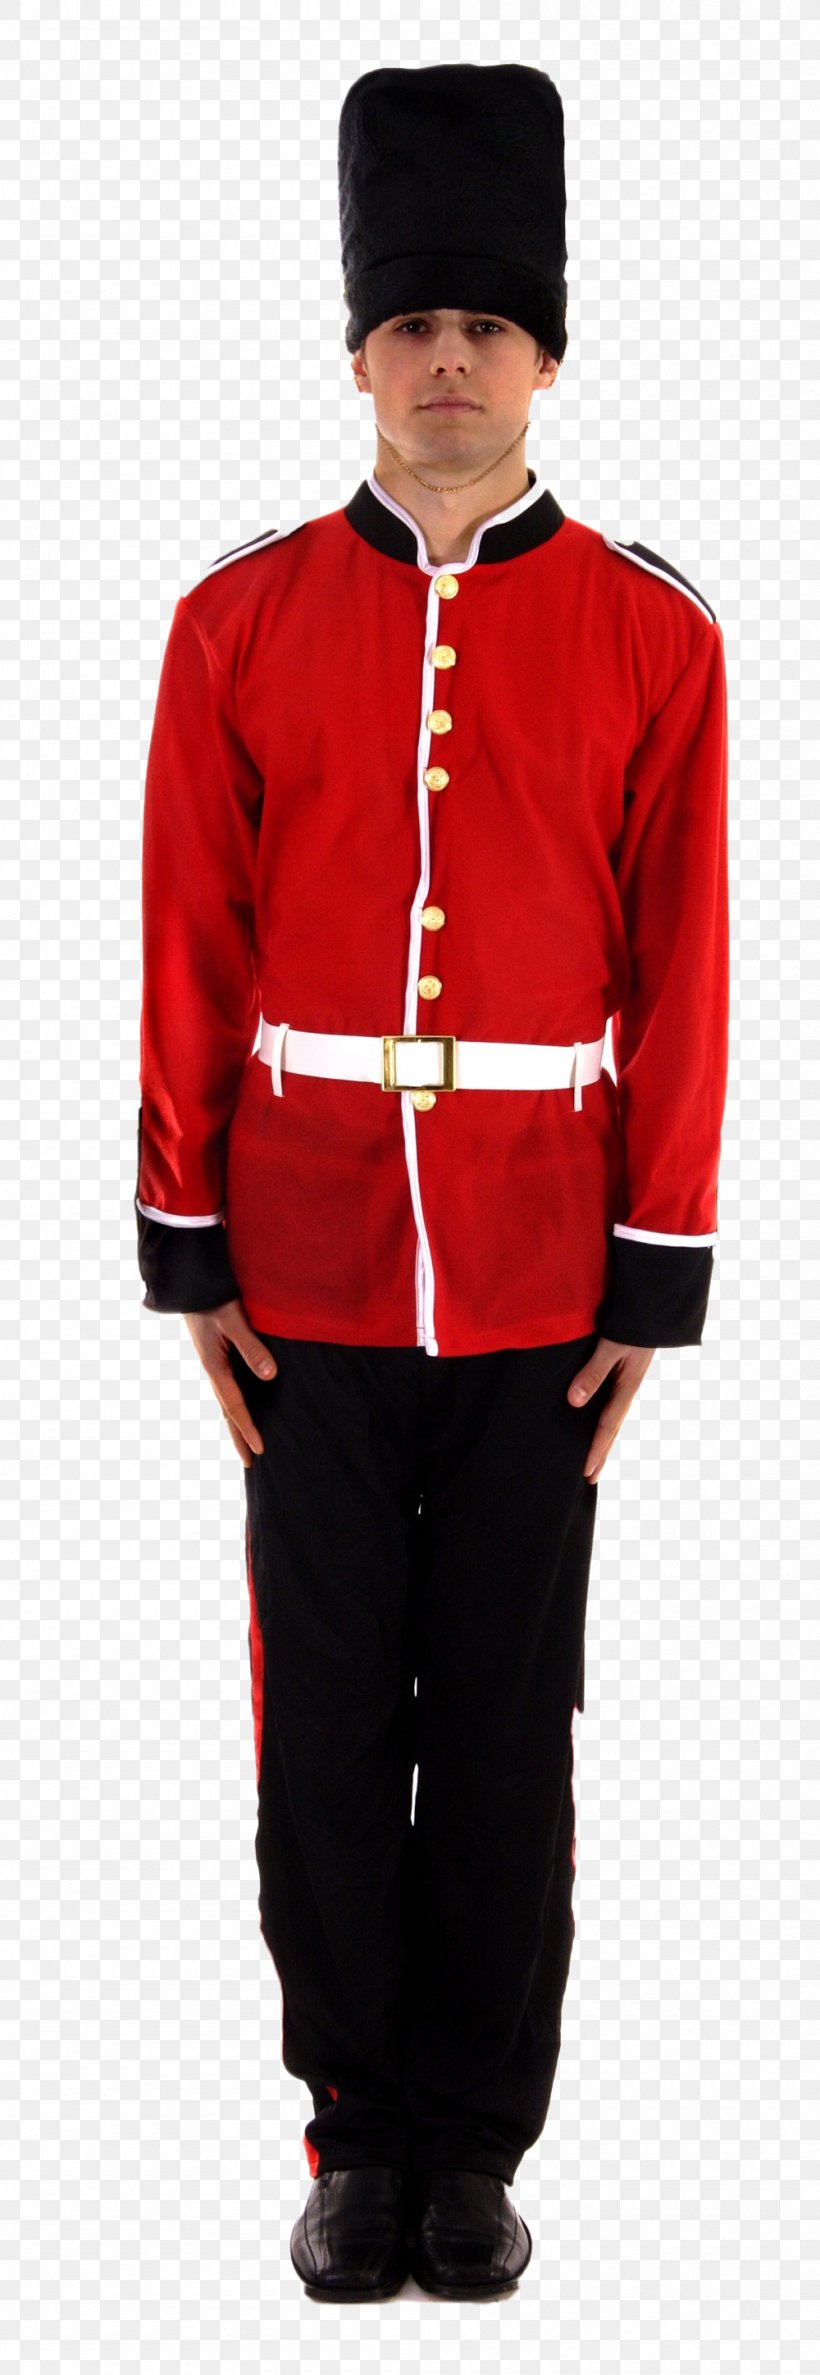 Queen's Guard Costume Party Amazon.com Busby, PNG, 1000x2897px, Costume, Amazoncom, Busby, Clothing, Costume Party Download Free